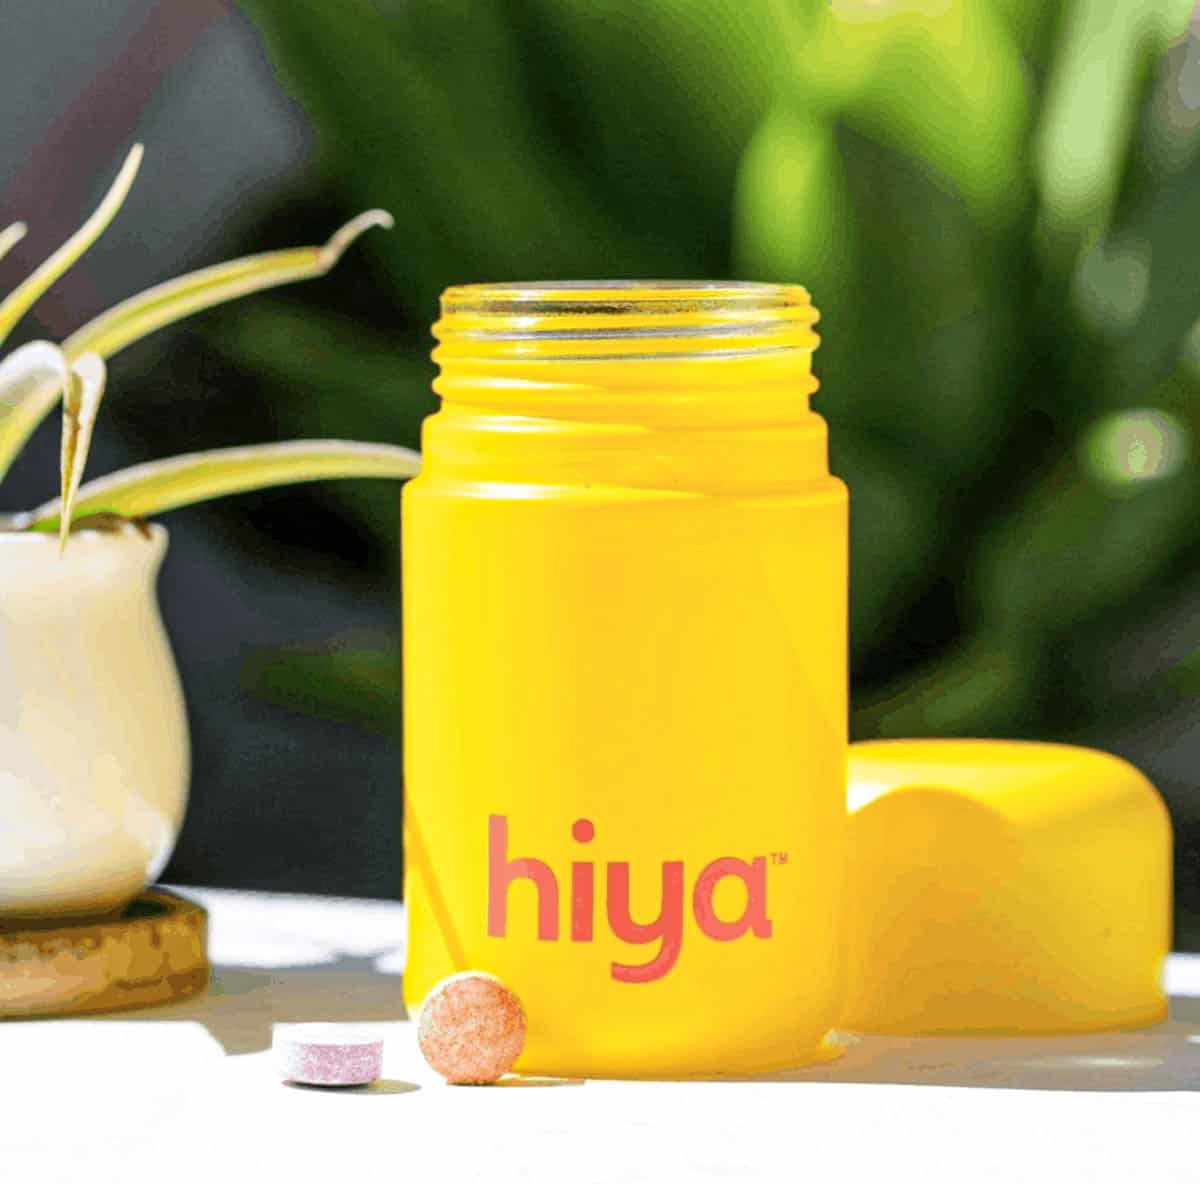 Open Hiya vitamins bottle with two vitamins sitting in front of the bottle.